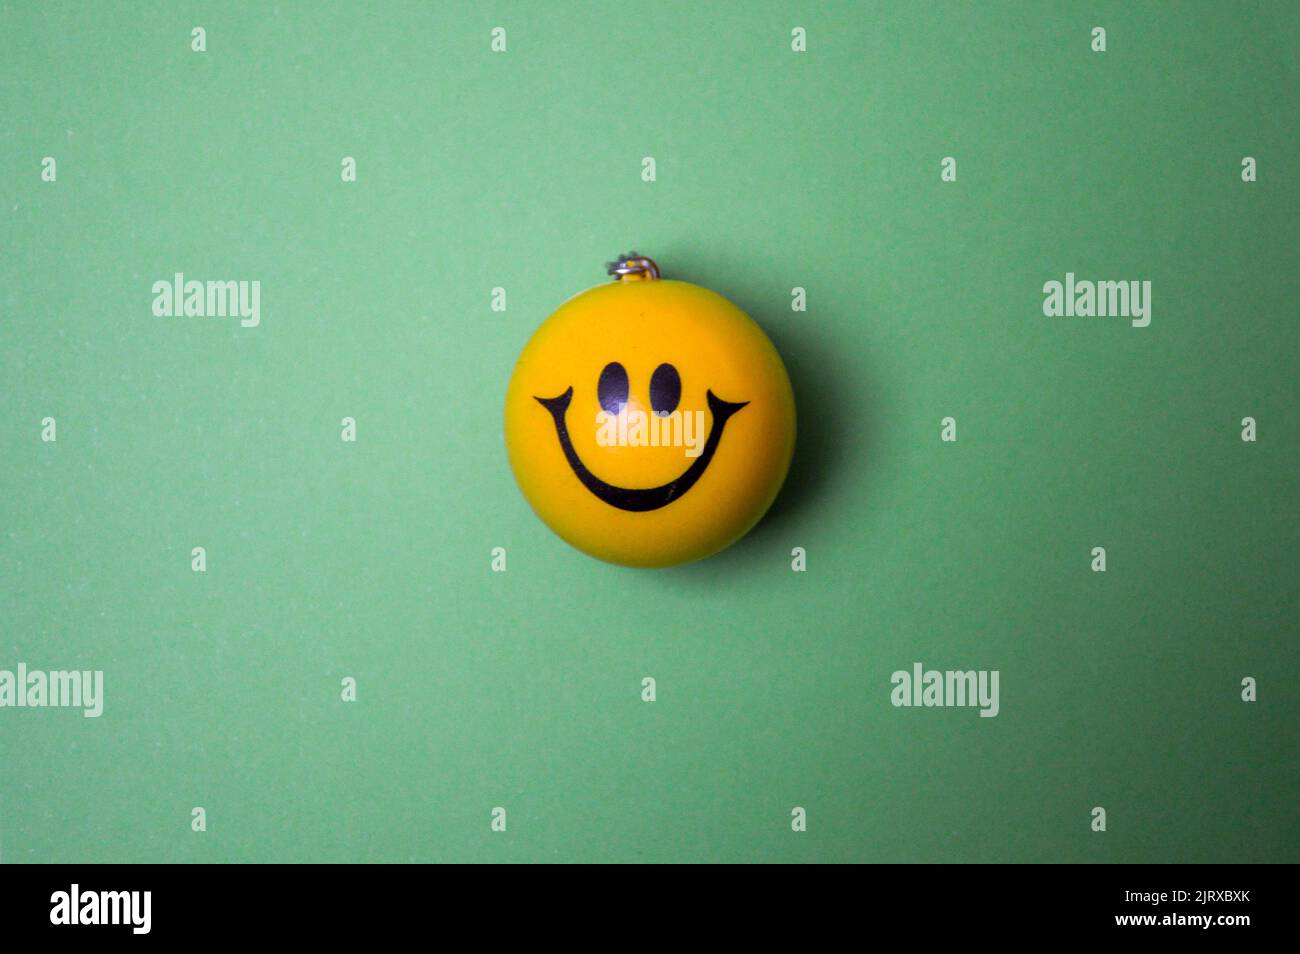 Photo of a yellow smiley face on green background Stock Photo